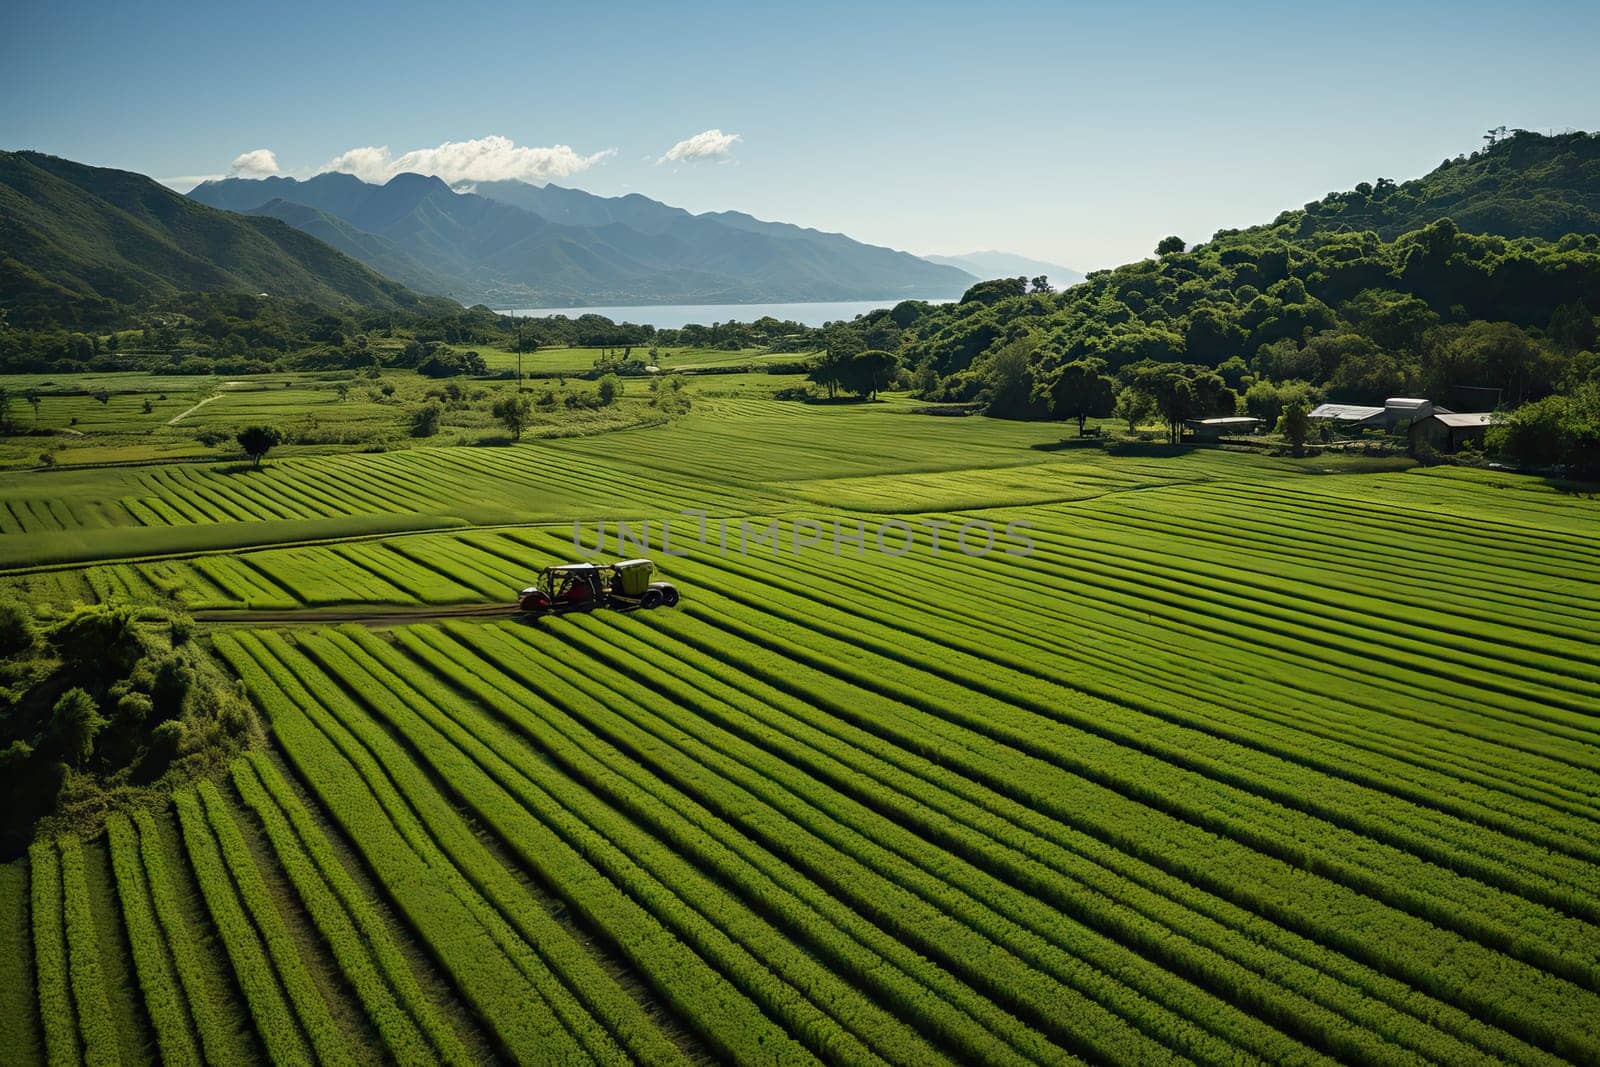 a green field with mountains in the background and a tractor driving through it on the right side, surrounded by lush vegetation